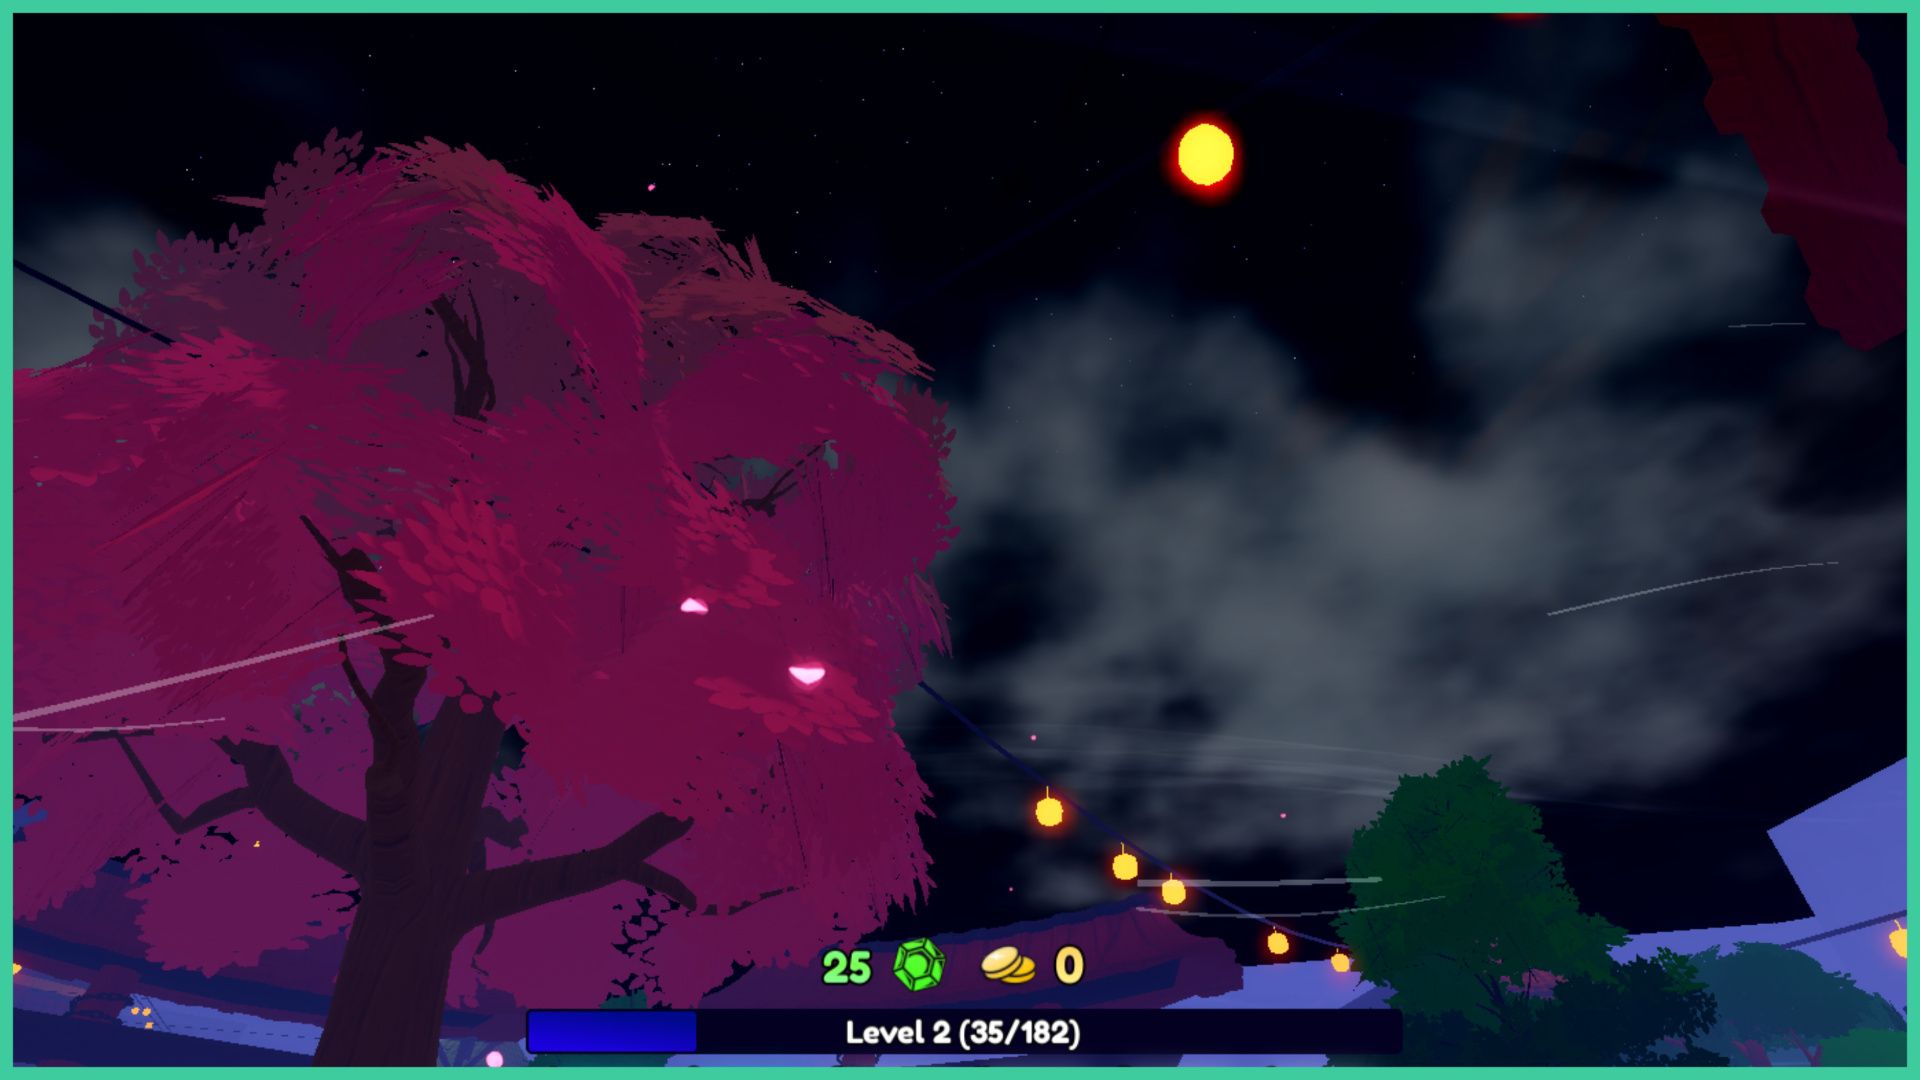 feature image for our anime last stand ghiaccio guide, the image features a screenshot of the sky as glowing lanterns suspend from the orange leaves in the trees with clouds in the dark sky